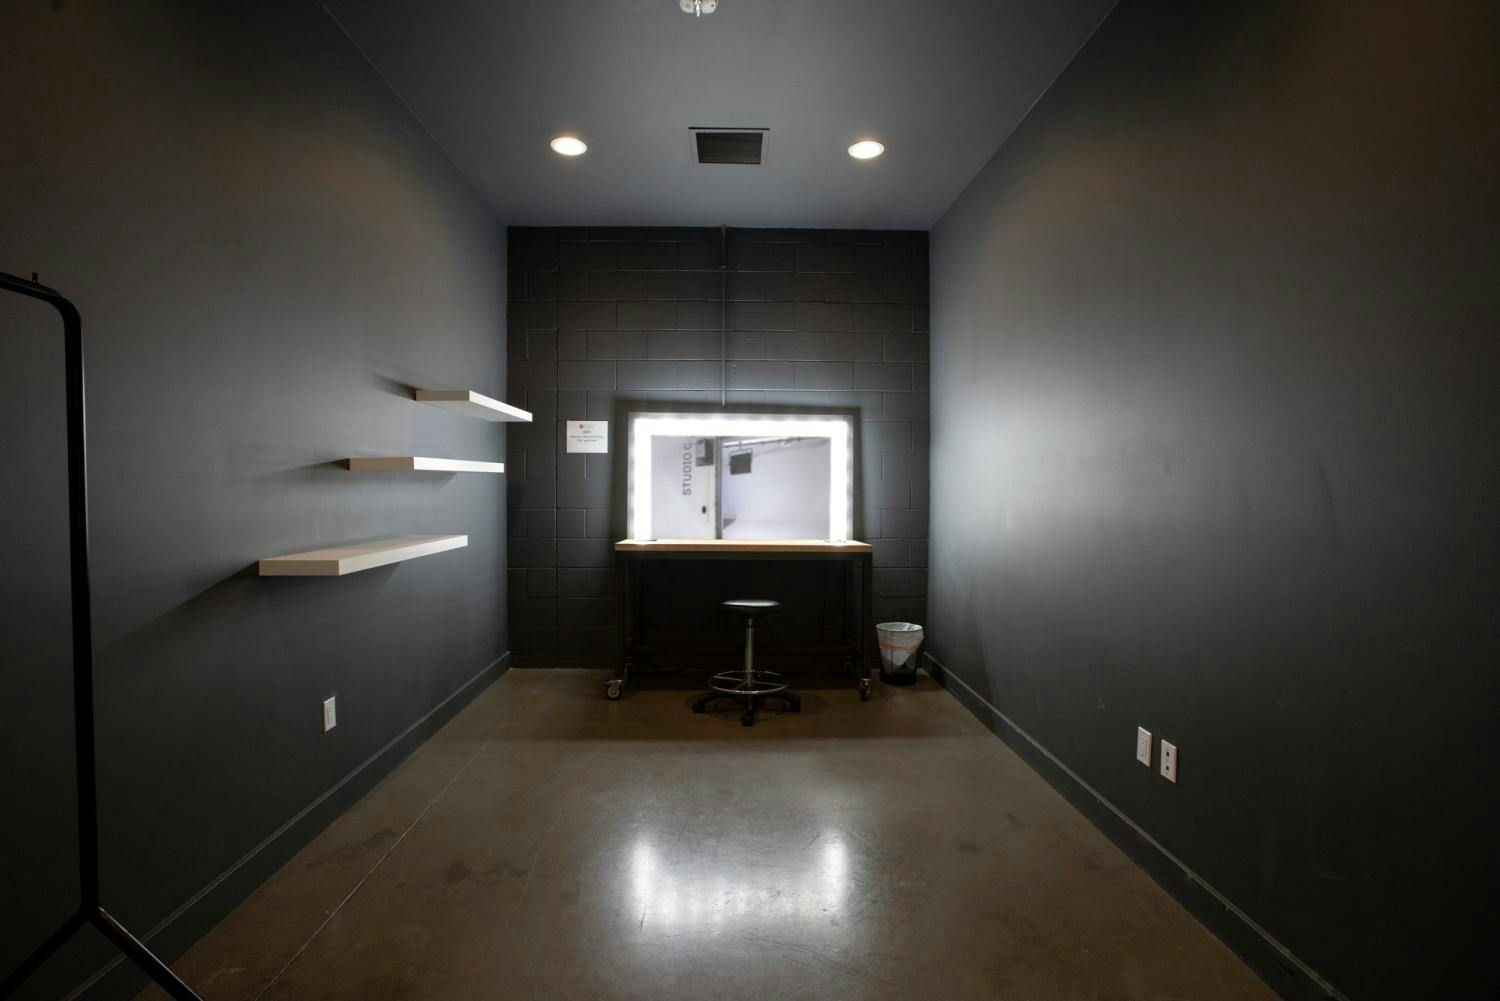 A dark-toned makeup room with a lit mirror, wooden desk, adjustable stool, and empty shelves on a gray wall.